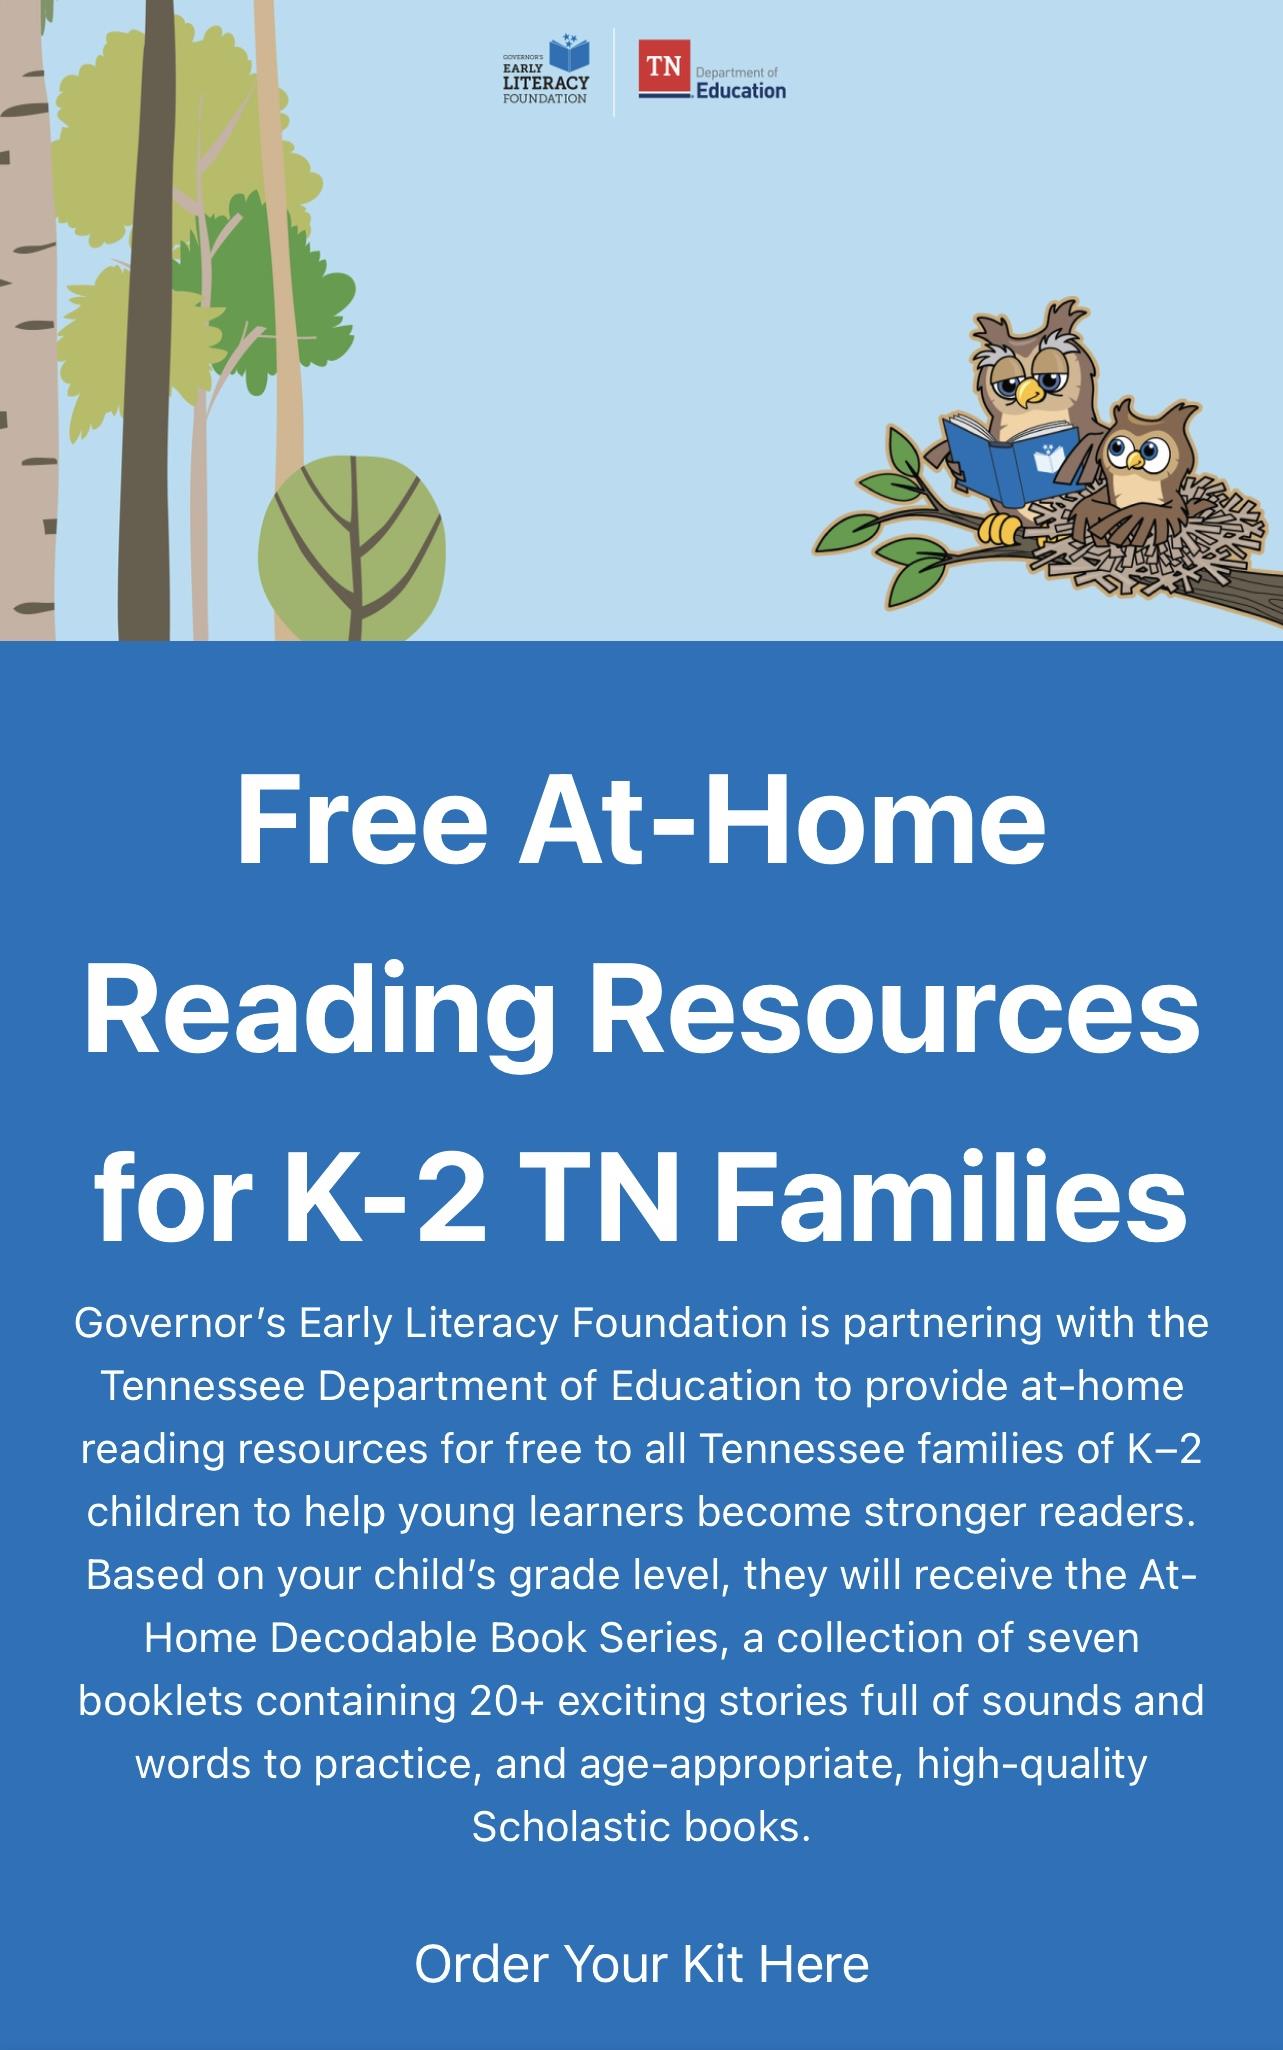 Free At-Home Reading Resources for K-2 TN Families Governor’s Early Literacy Foundation is partnering with the Tennessee Department of Education to provide at-home reading resources for free to all Tennessee families of K–2 children to help young learners become stronger readers. Based on your child’s grade level, they will receive the At-Home Decodable Book Series, a collection of seven booklets containing 20+ exciting stories full of sounds and words to practice, and age-appropriate, high-quality Scholastic books. Click Here to go to the website and order free resources.